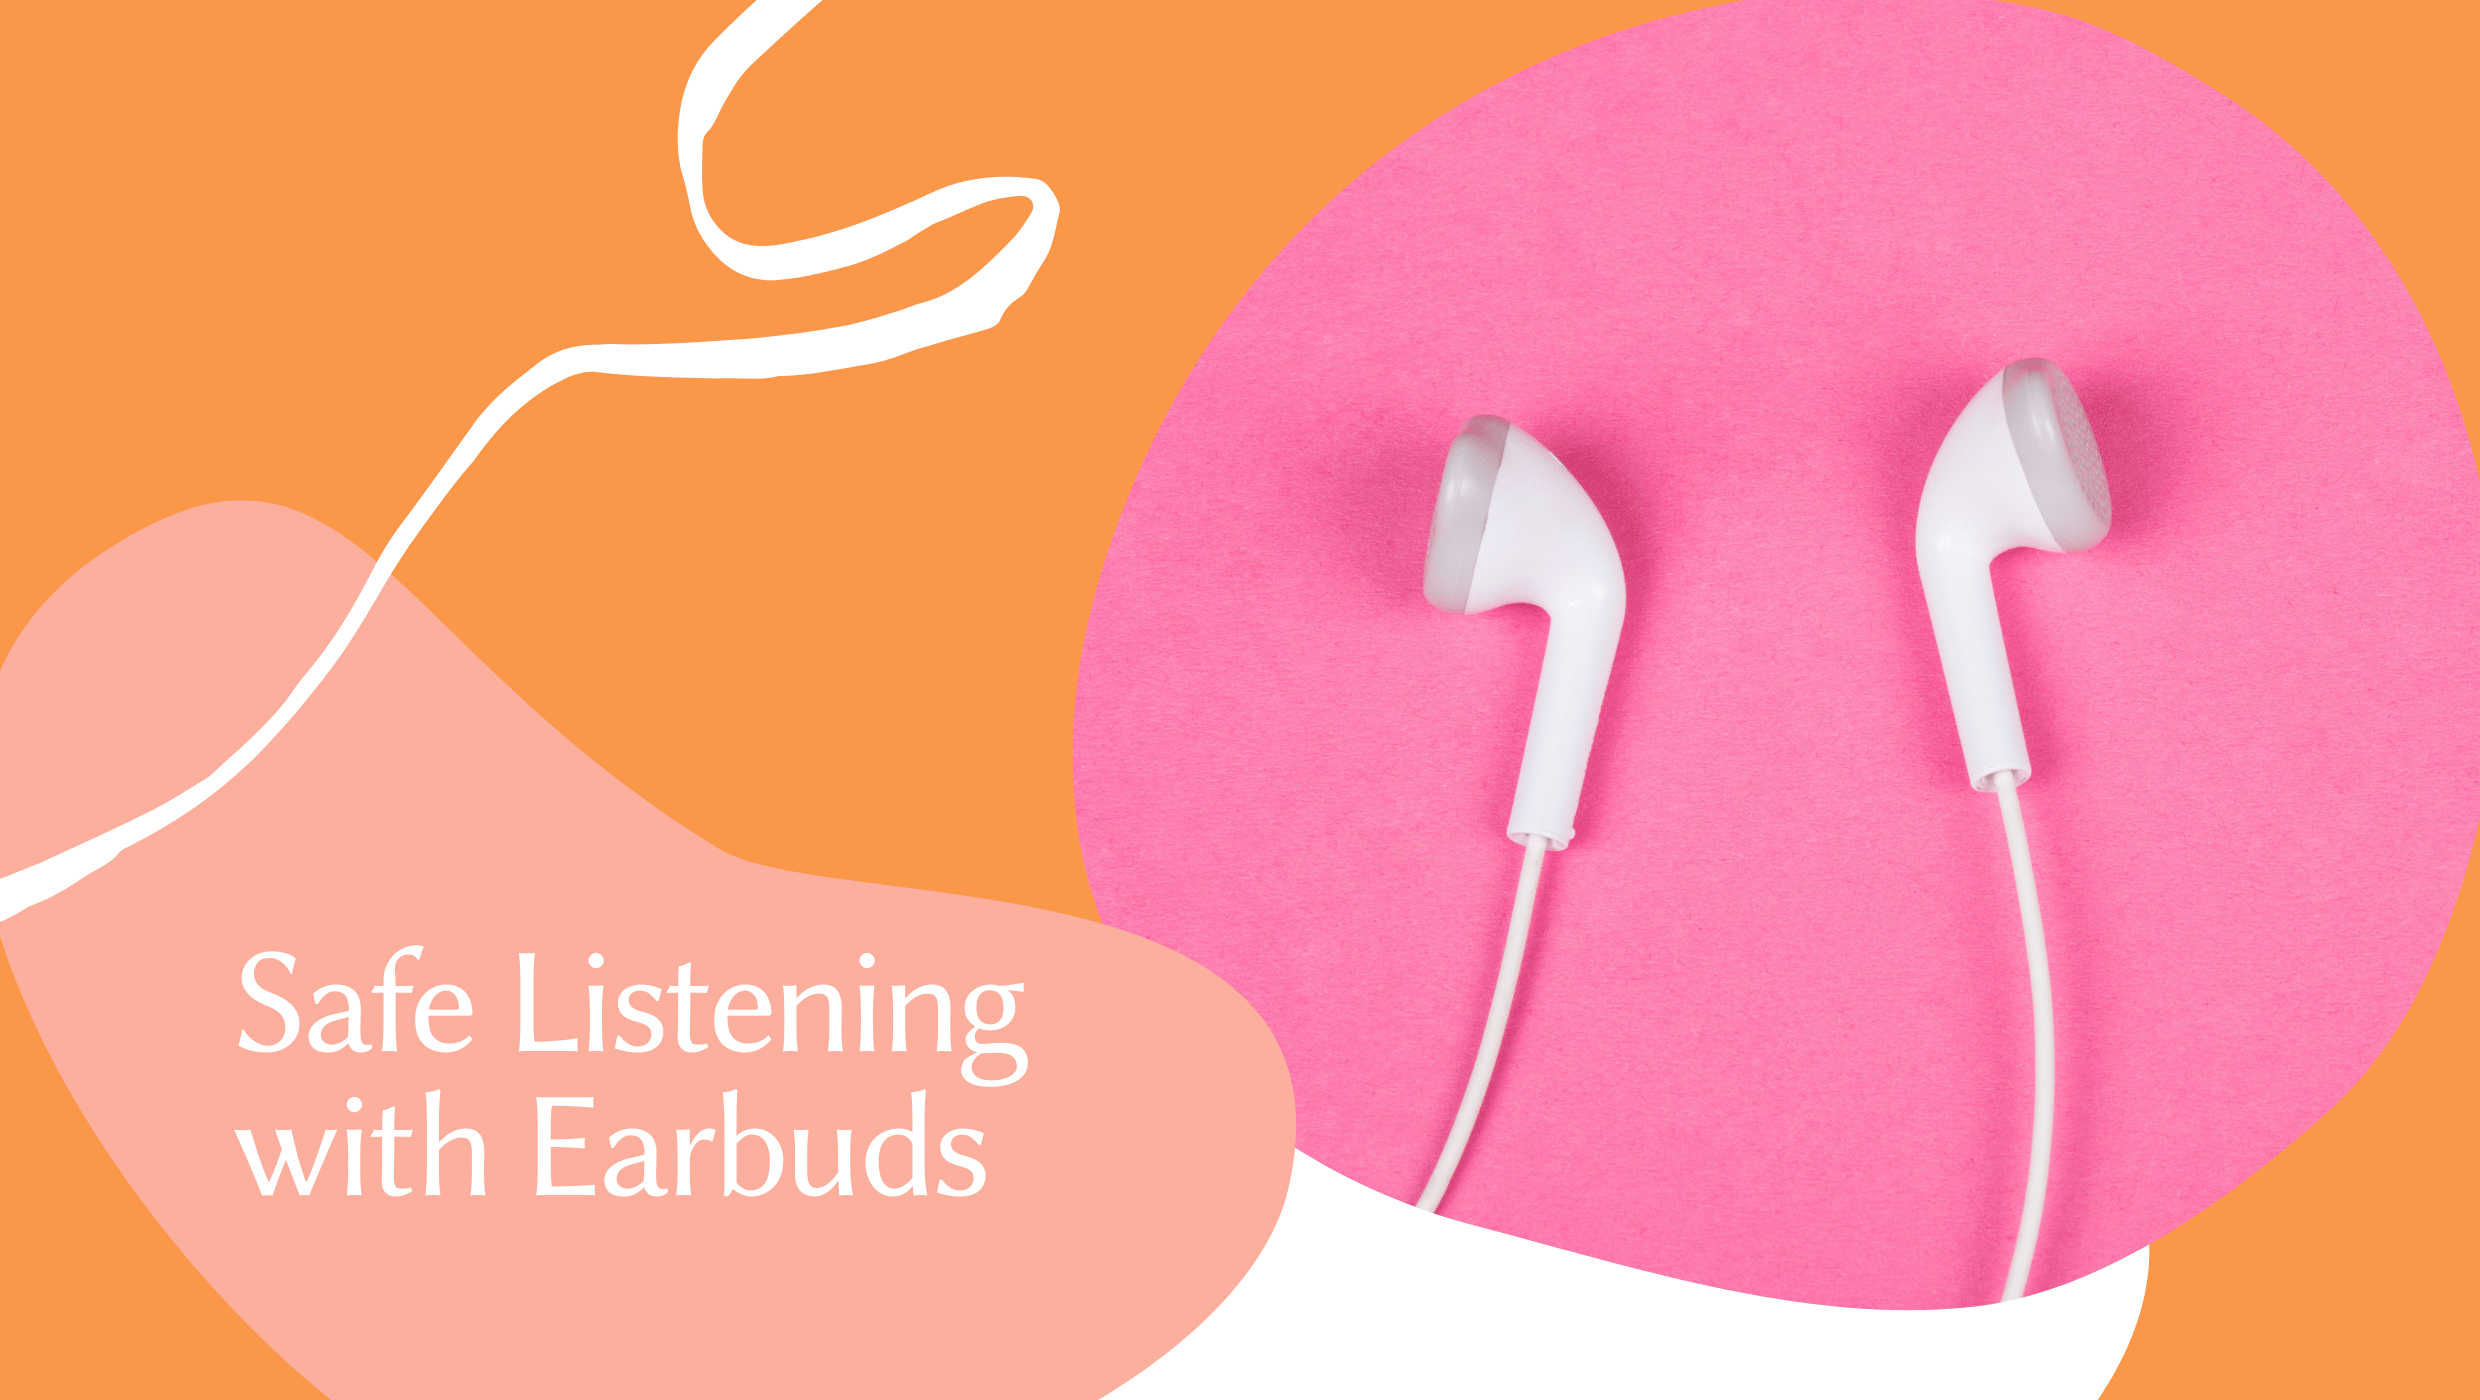 Featured image for “Safe Listening with Earbuds”